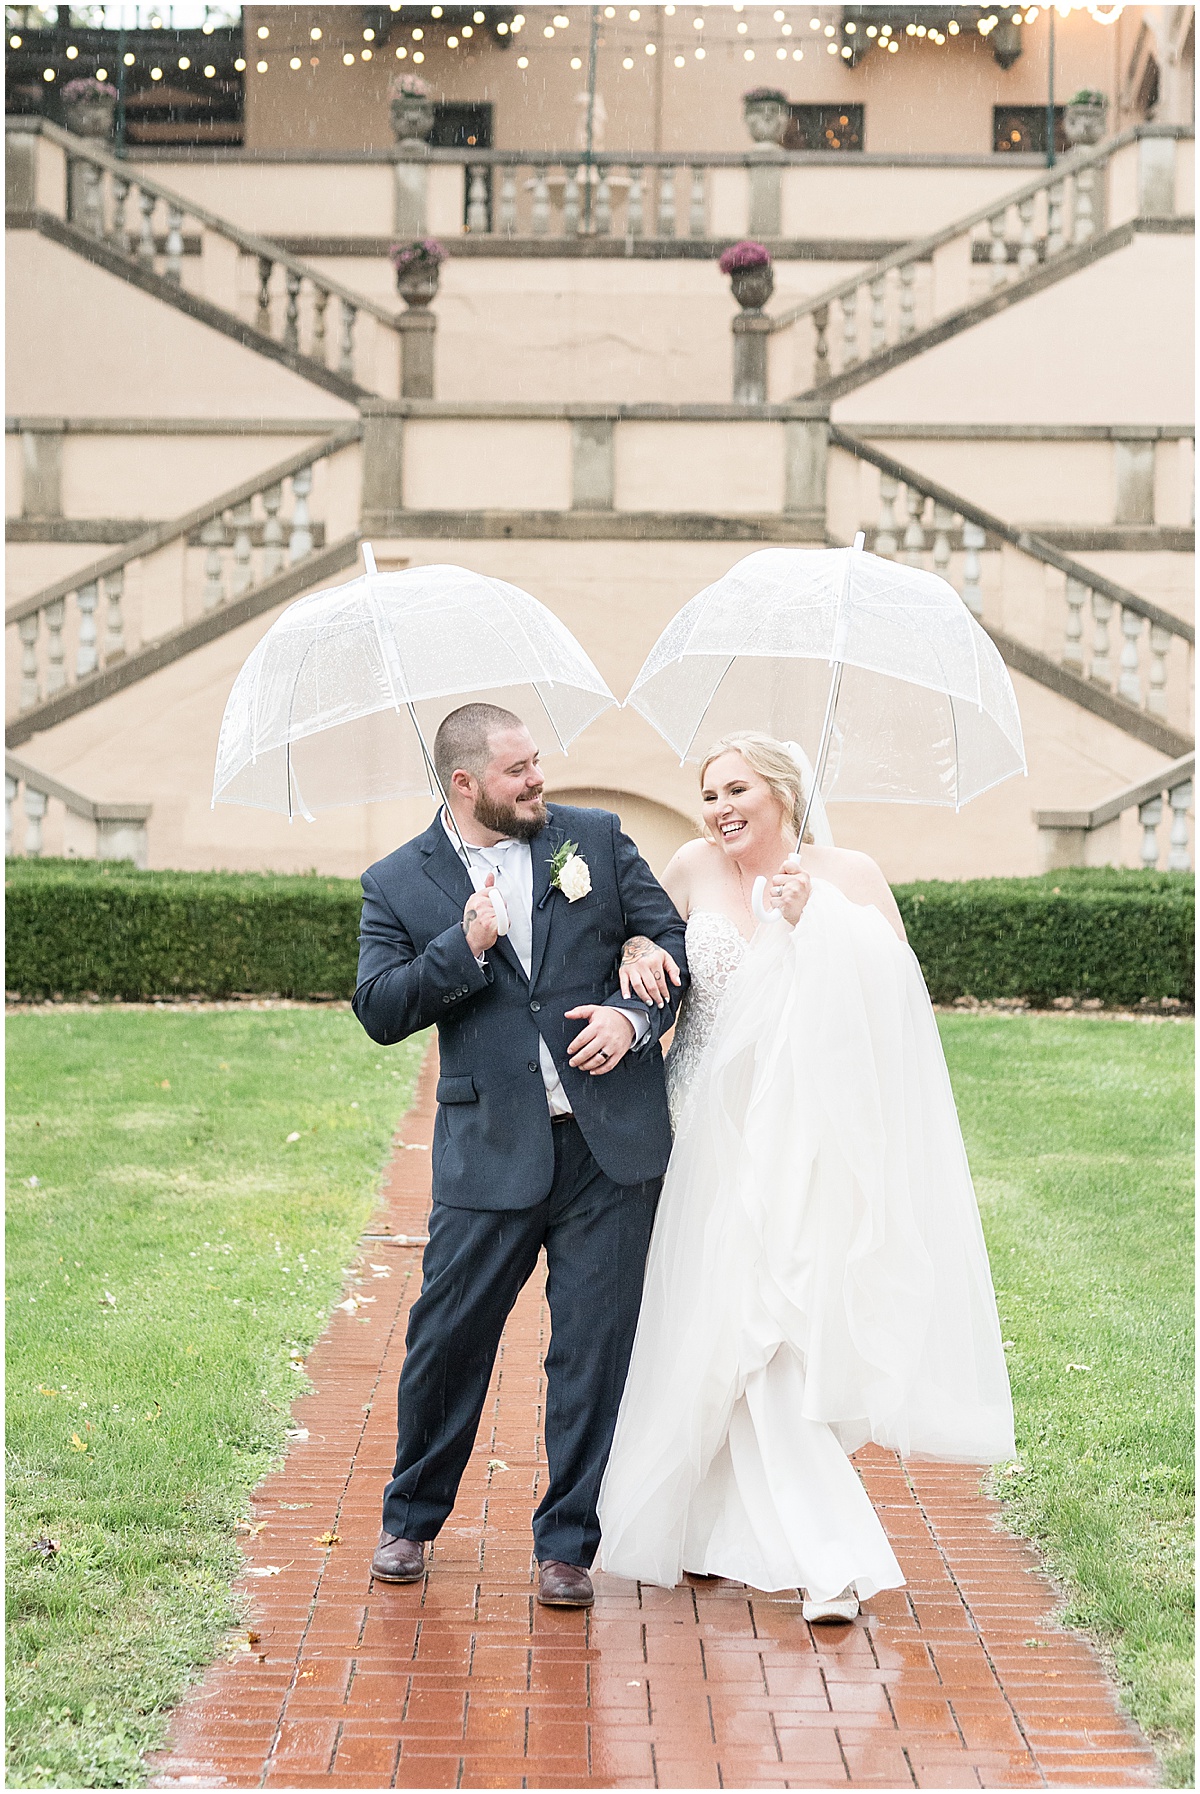 Bride and groom dancing in the rain outside Fowler House Mansion wedding